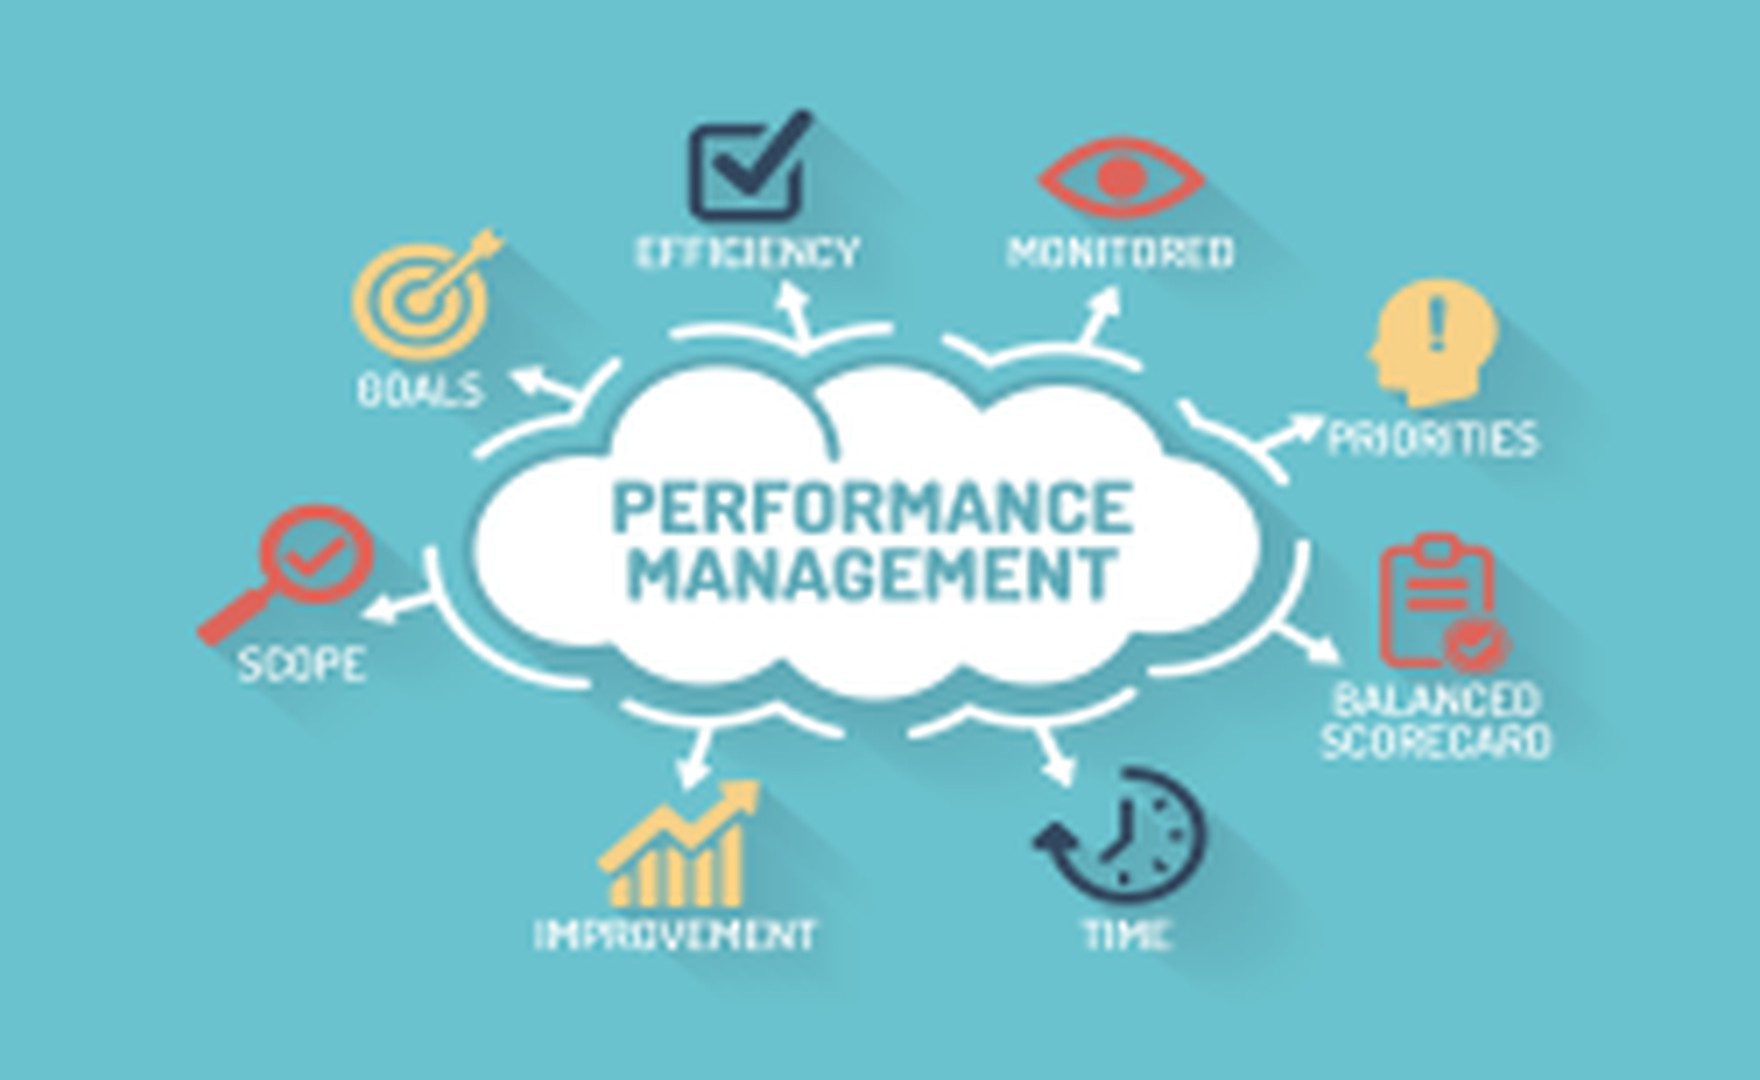 Do you need to rethink your performance management